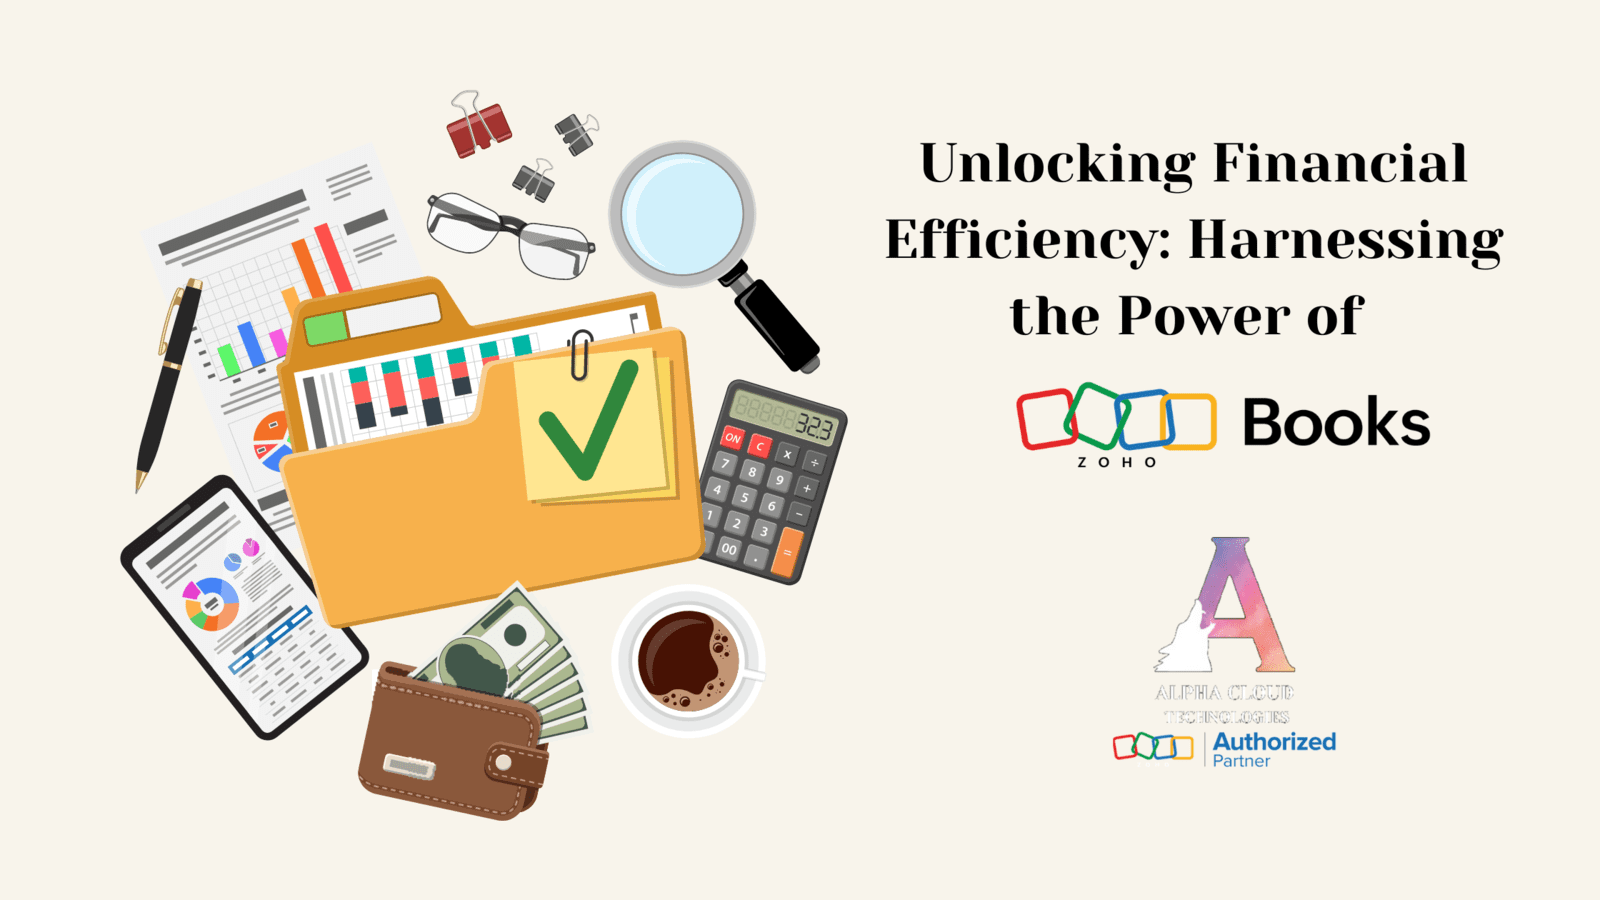  Unlocking Financial Efficiency: Harnessing the Power of Zoho Books